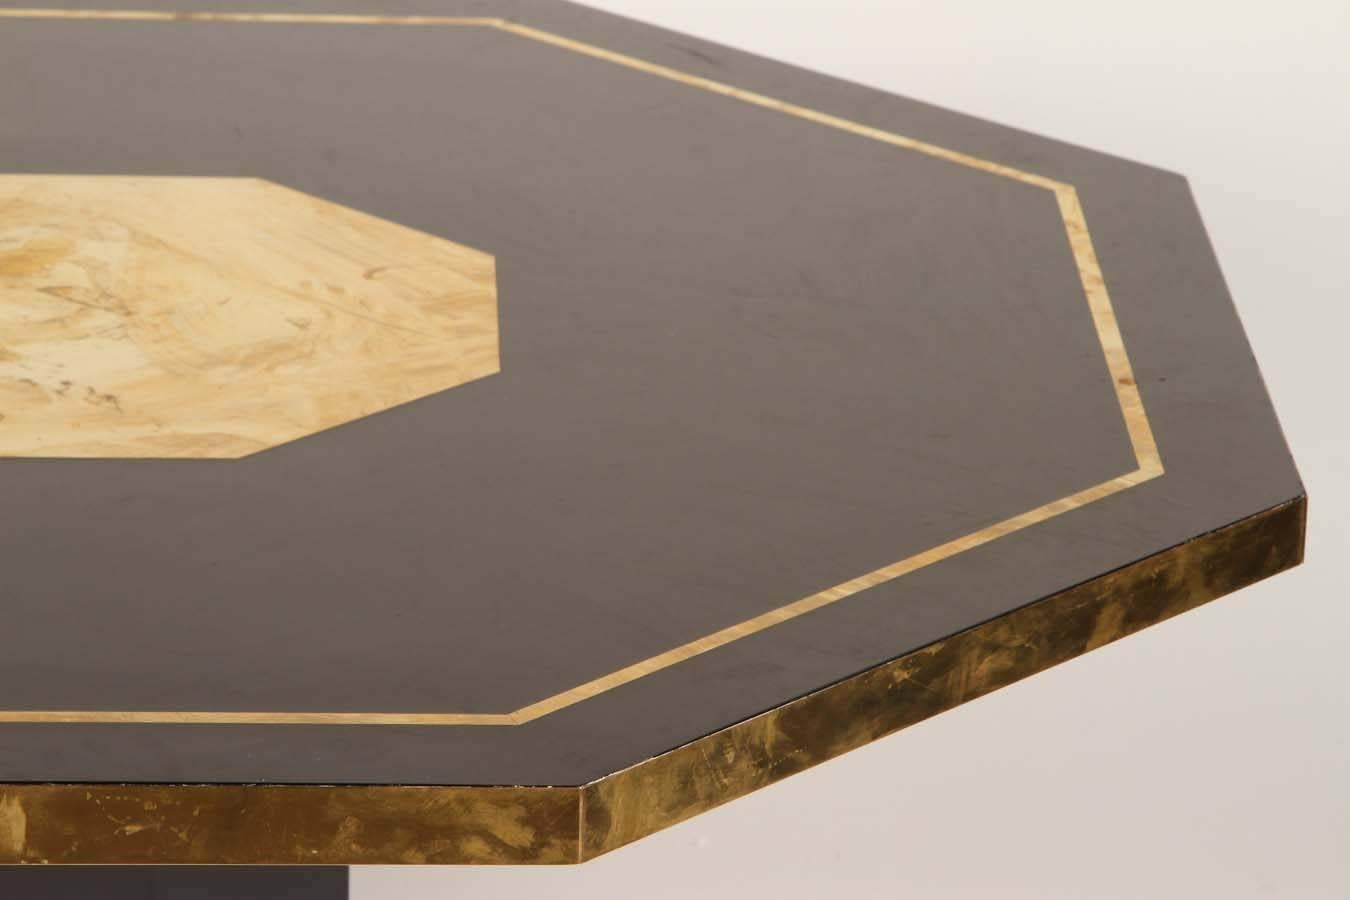 This wonderful black lacquered octagonal table, has glamorous brass accents including an inset panel. It is a wonderful example of Mahey's early work, exemplified by the noble materials used with exuberance. 
This table could be used as a game